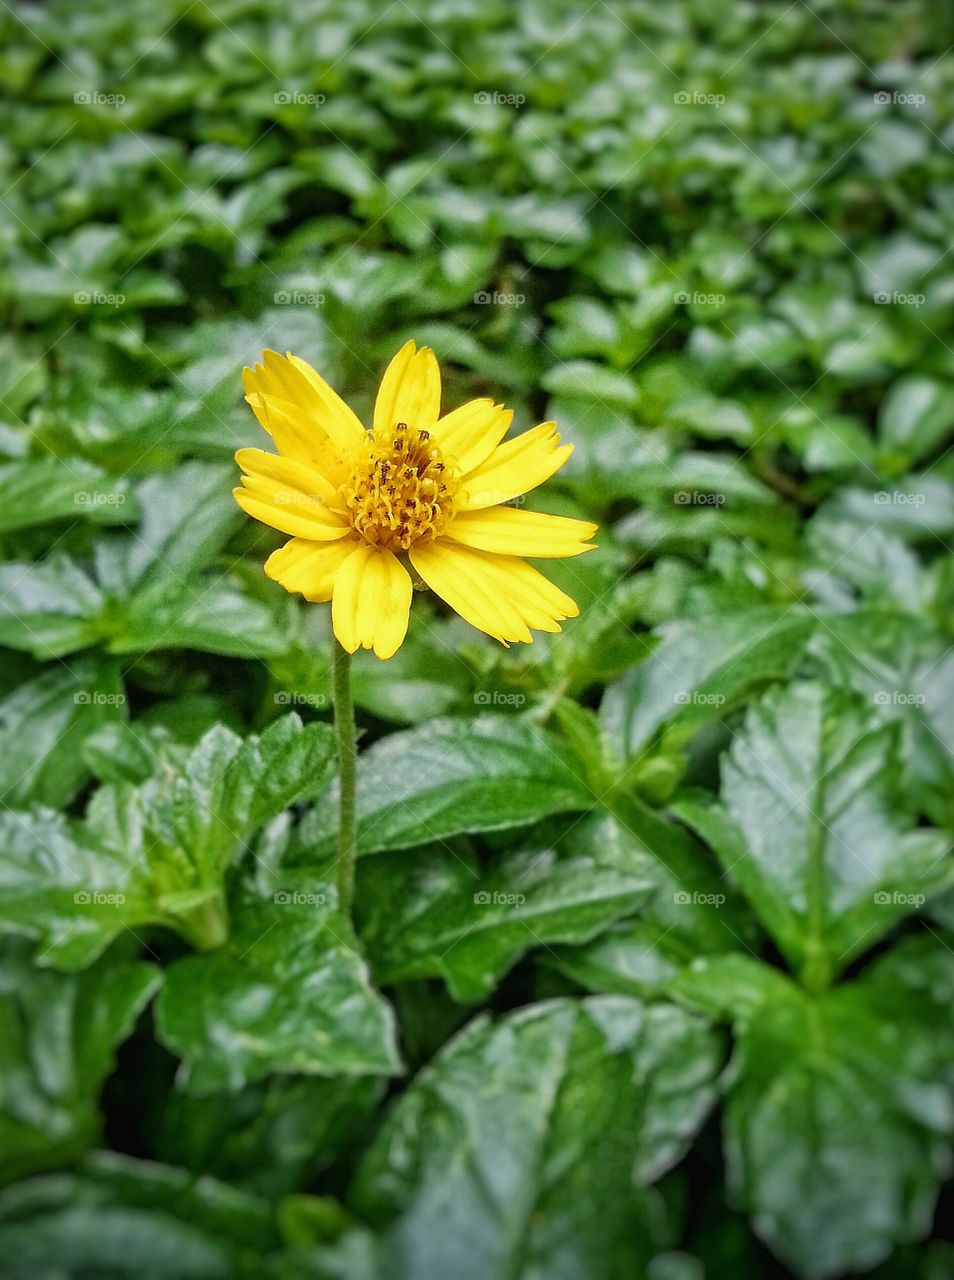 stand alone yellow flower. i don't know this flower's name. i call it's yellow flower